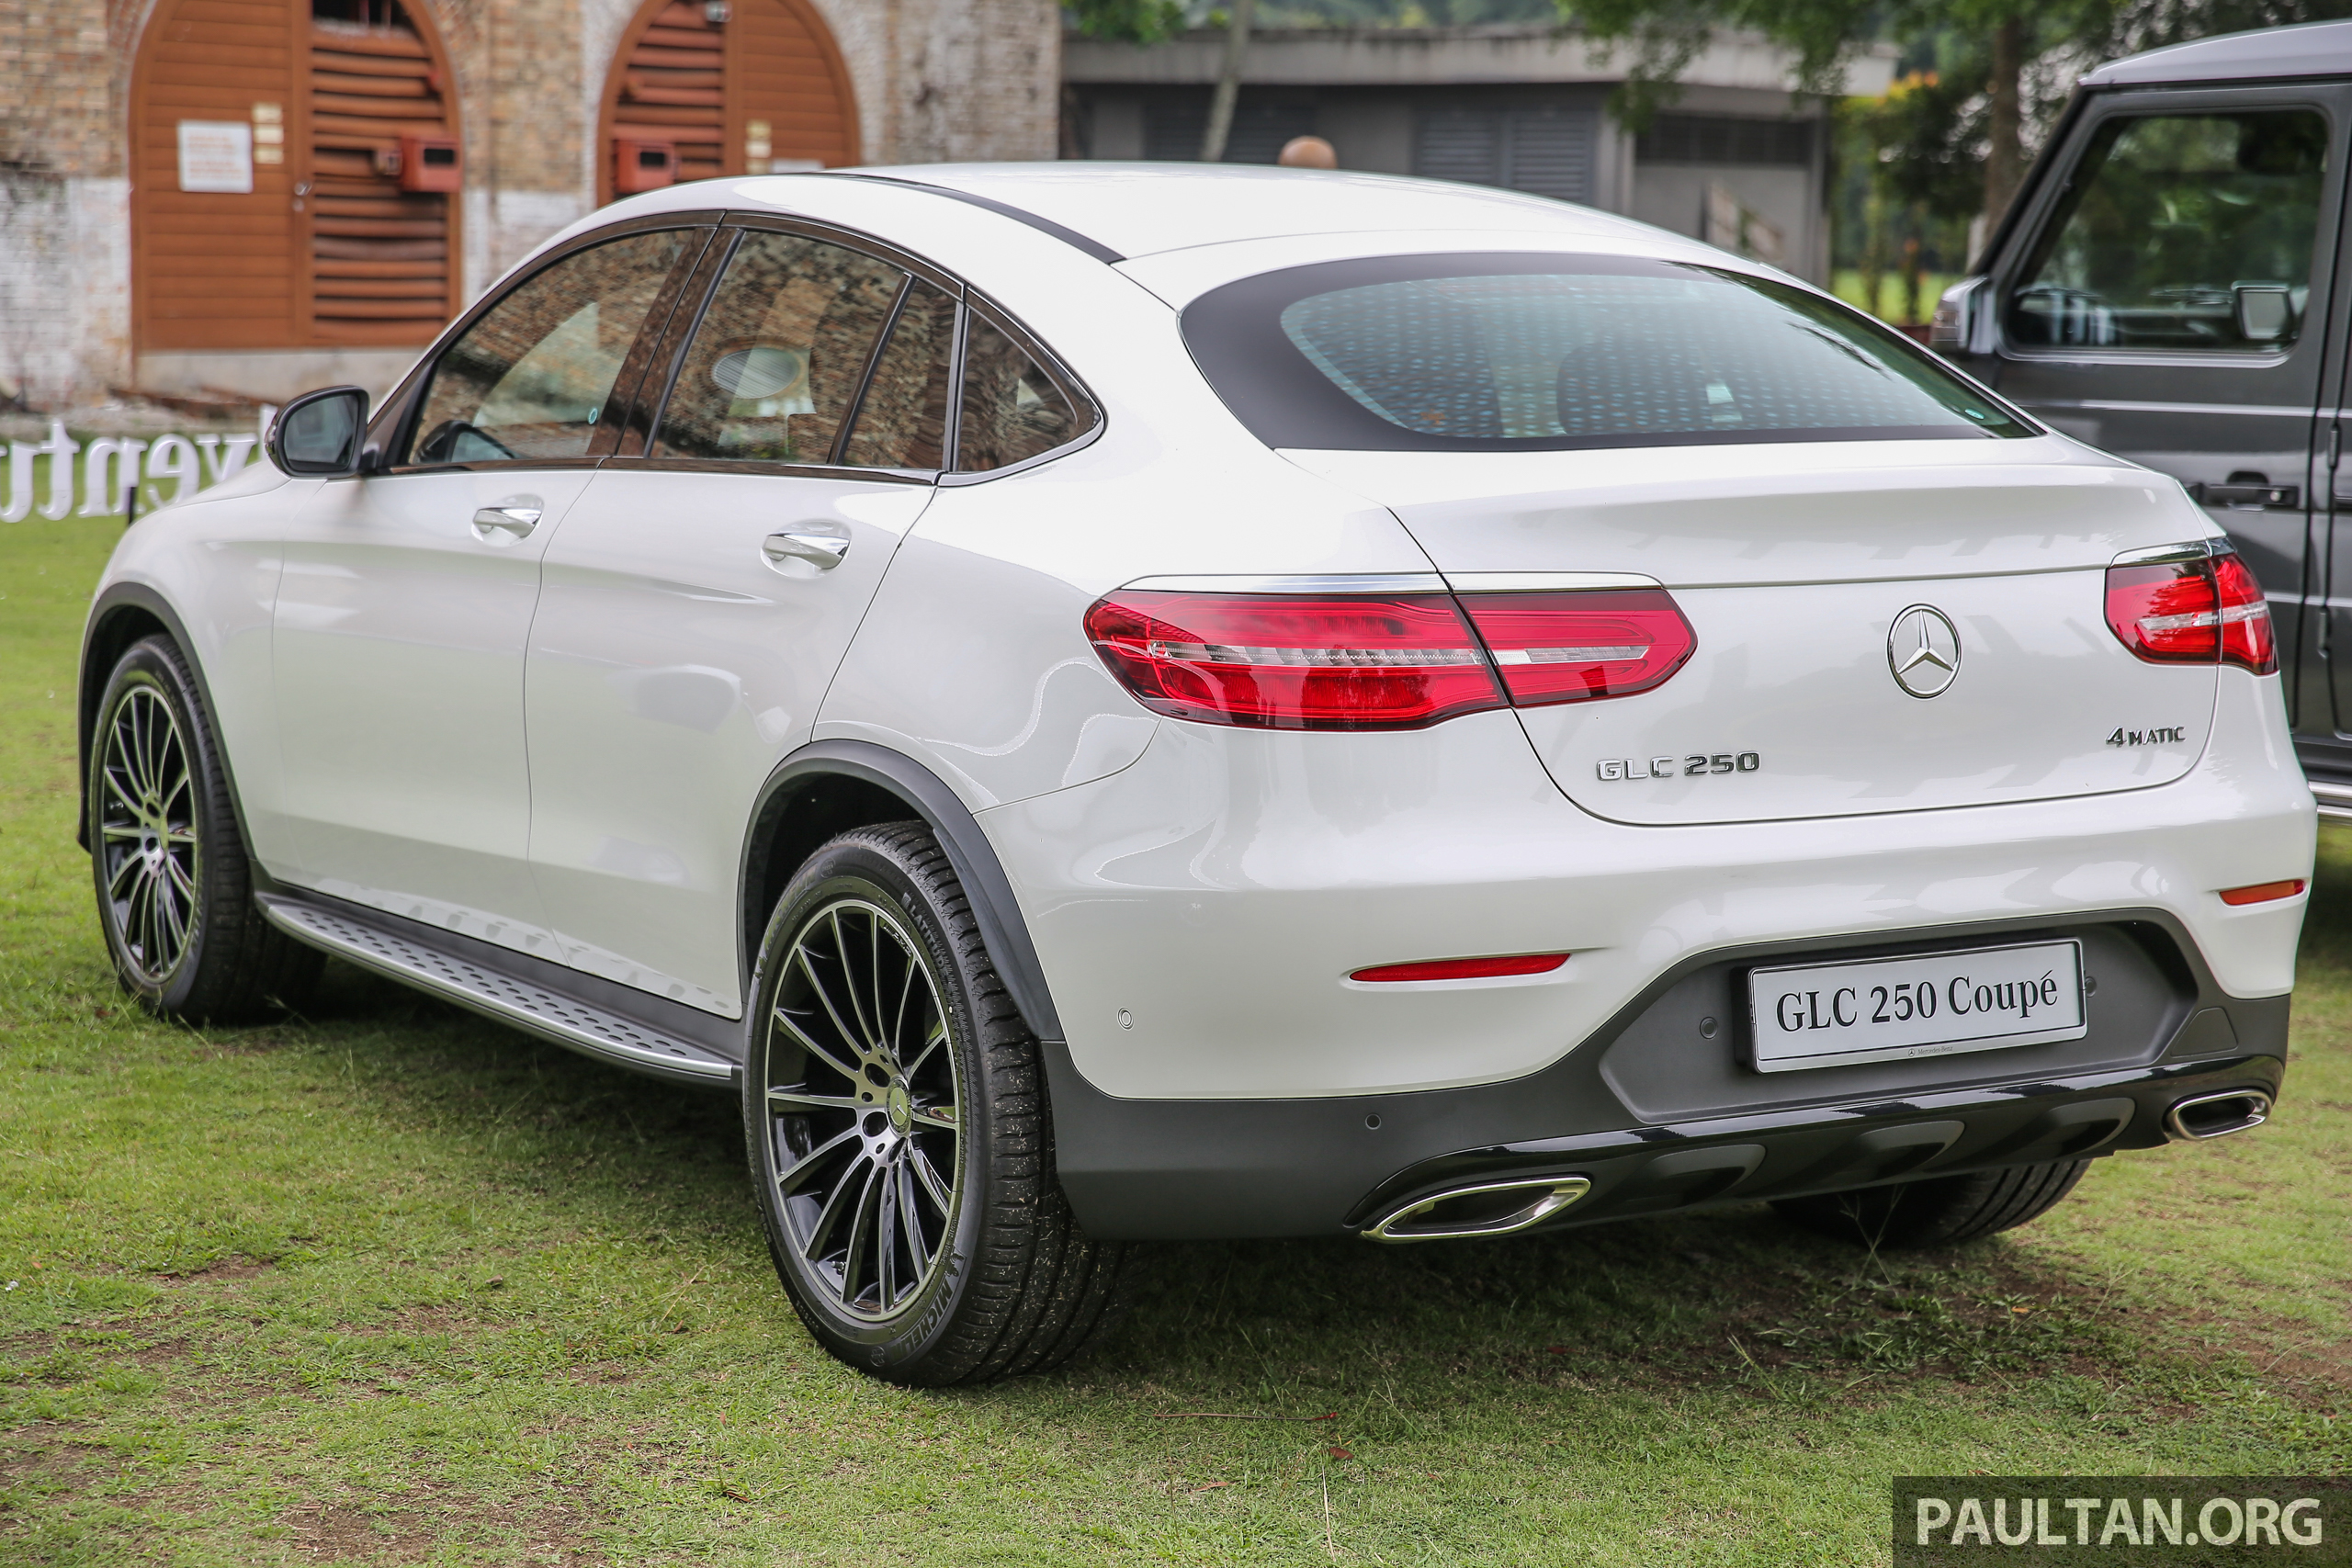 Mercedes-Benz GLC Coupe makes its Malaysian debut - single GLC 250 ...